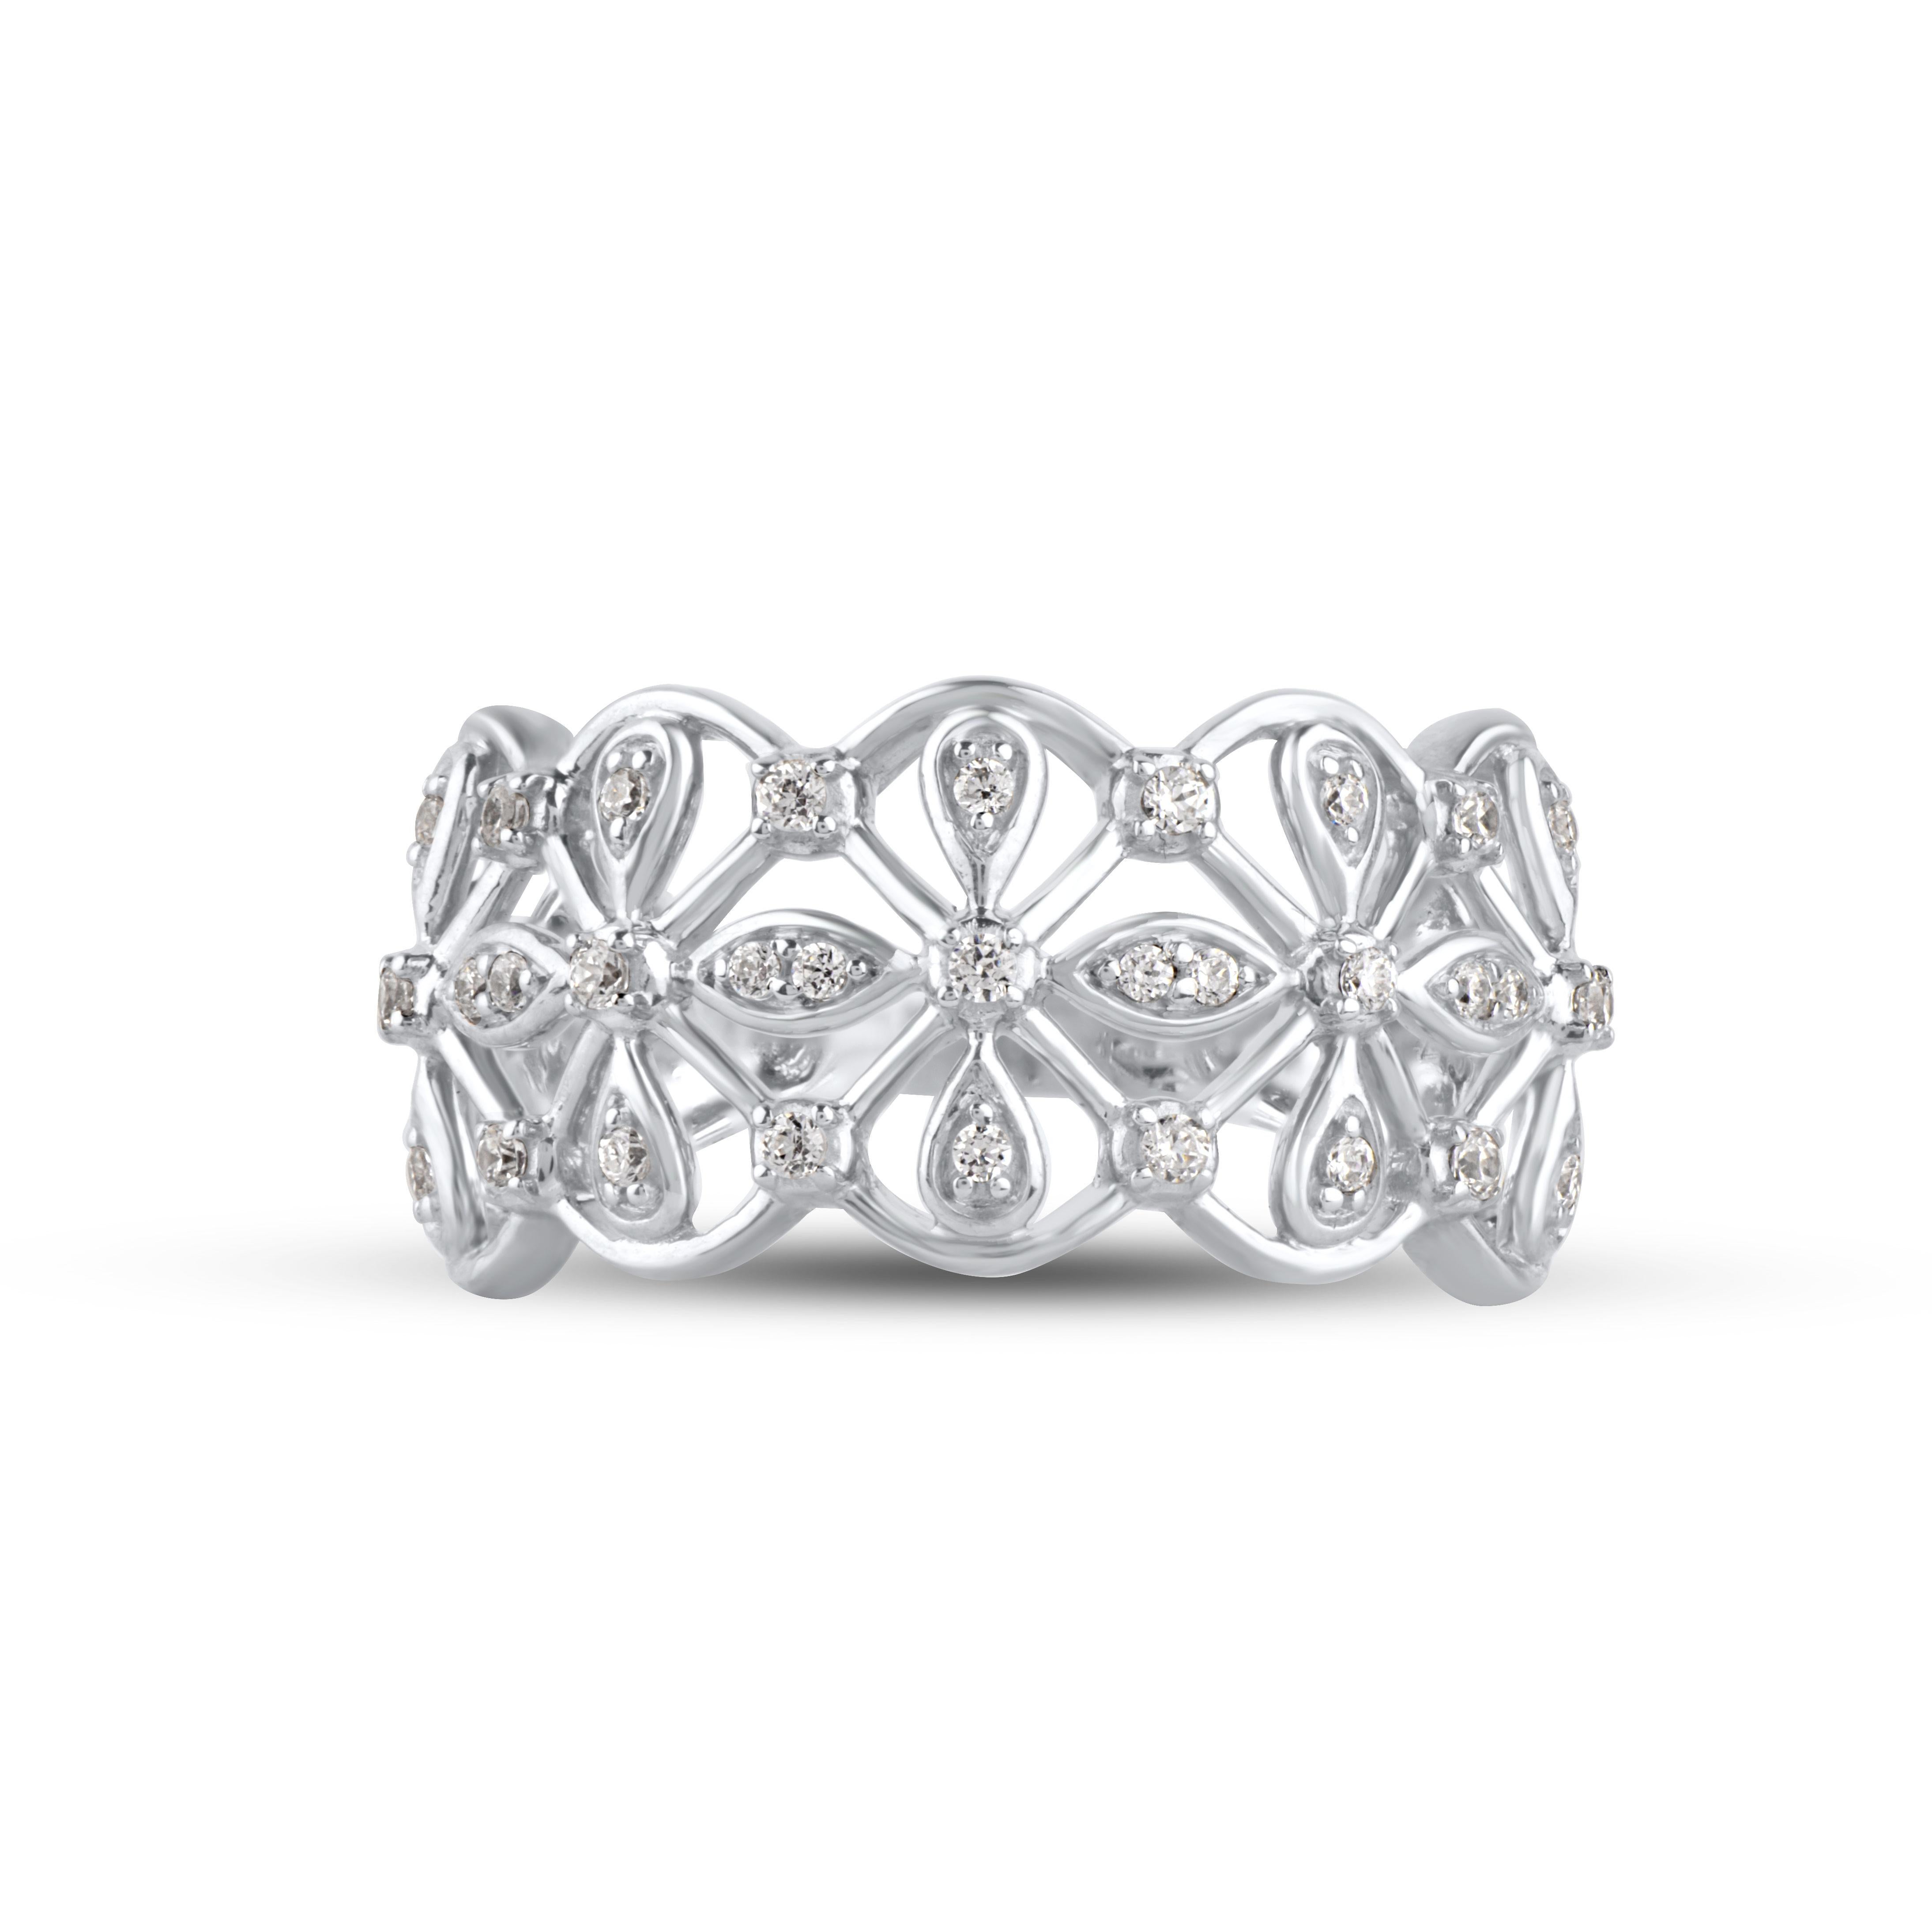 This Vintage Floral Wide Band Ring is expertly crafted in 14 Karat White Gold and features 31 Round cut White diamonds set in pave and prong setting, H-I color I2 clarity in a beautiful design forming a unique pattern. This ring has high polish